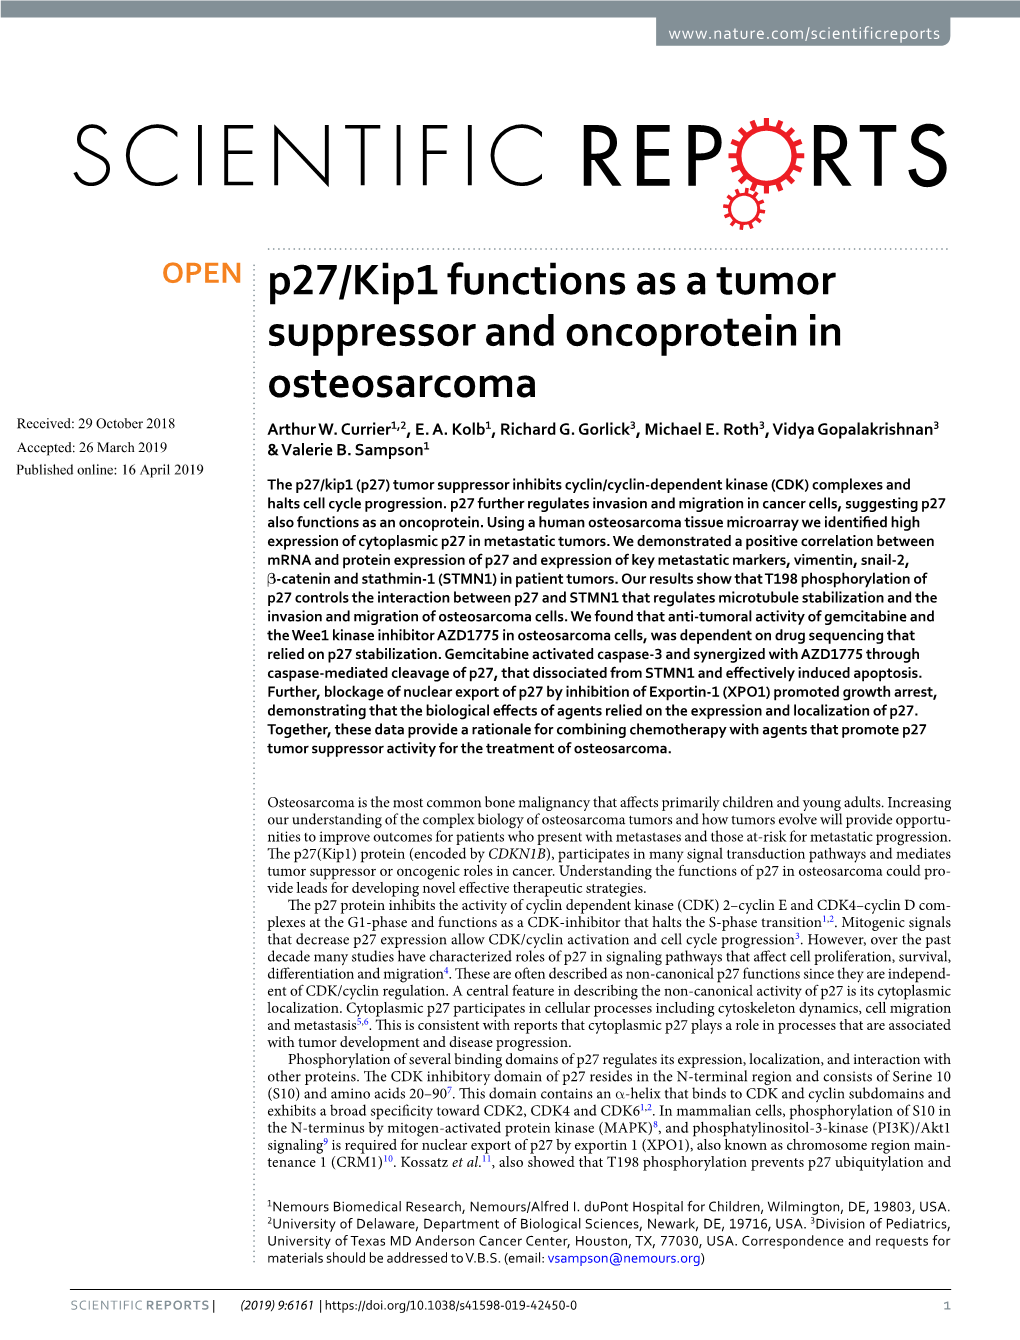 P27/Kip1 Functions As a Tumor Suppressor and Oncoprotein in Osteosarcoma Received: 29 October 2018 Arthur W